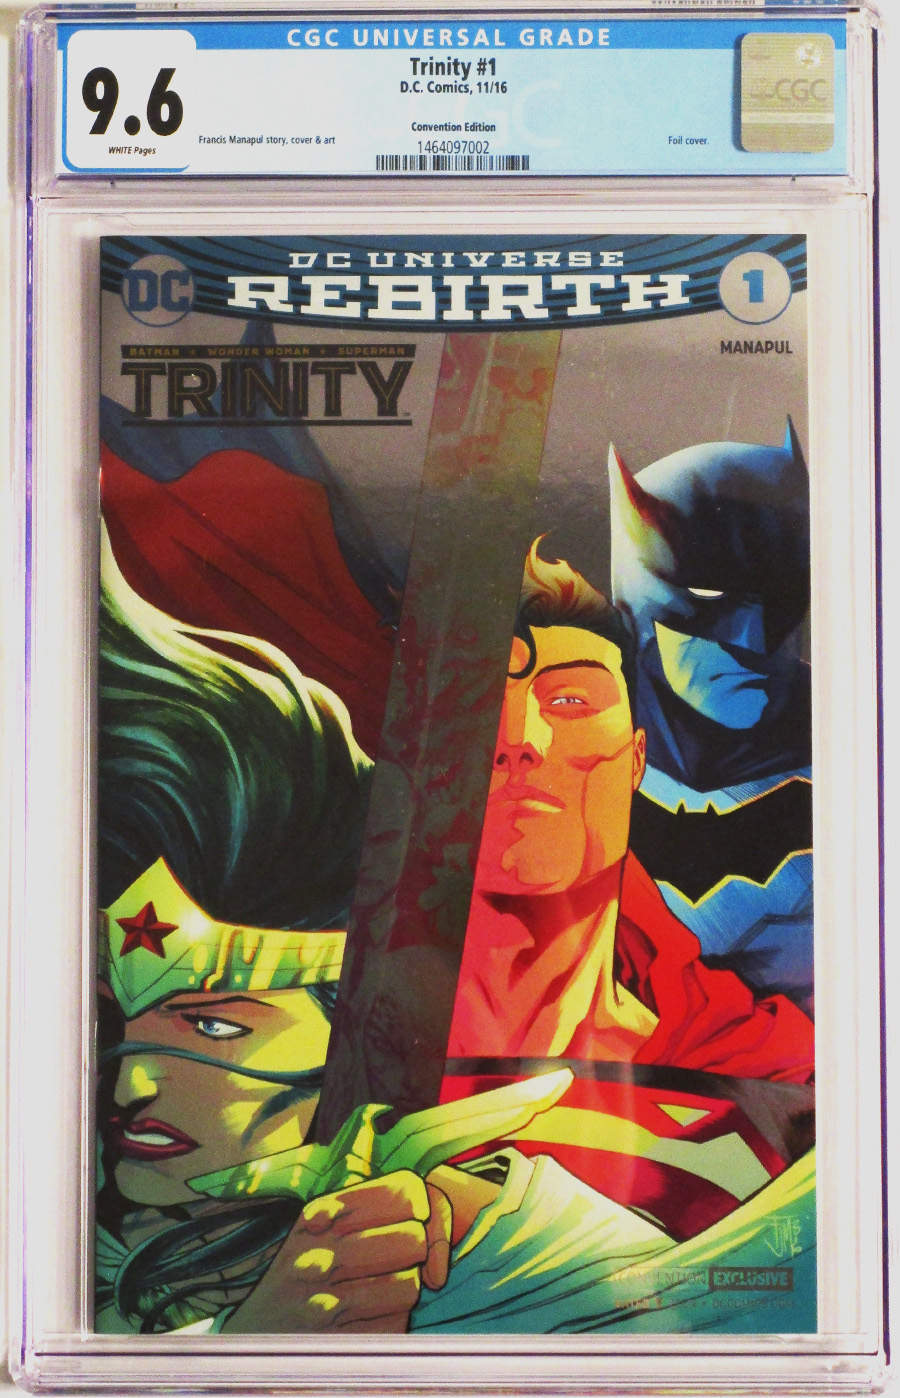 Trinity Vol 2 #1 Cover D NYCC Exclusive Francis Manapul Chrome Cover CGC 9.6